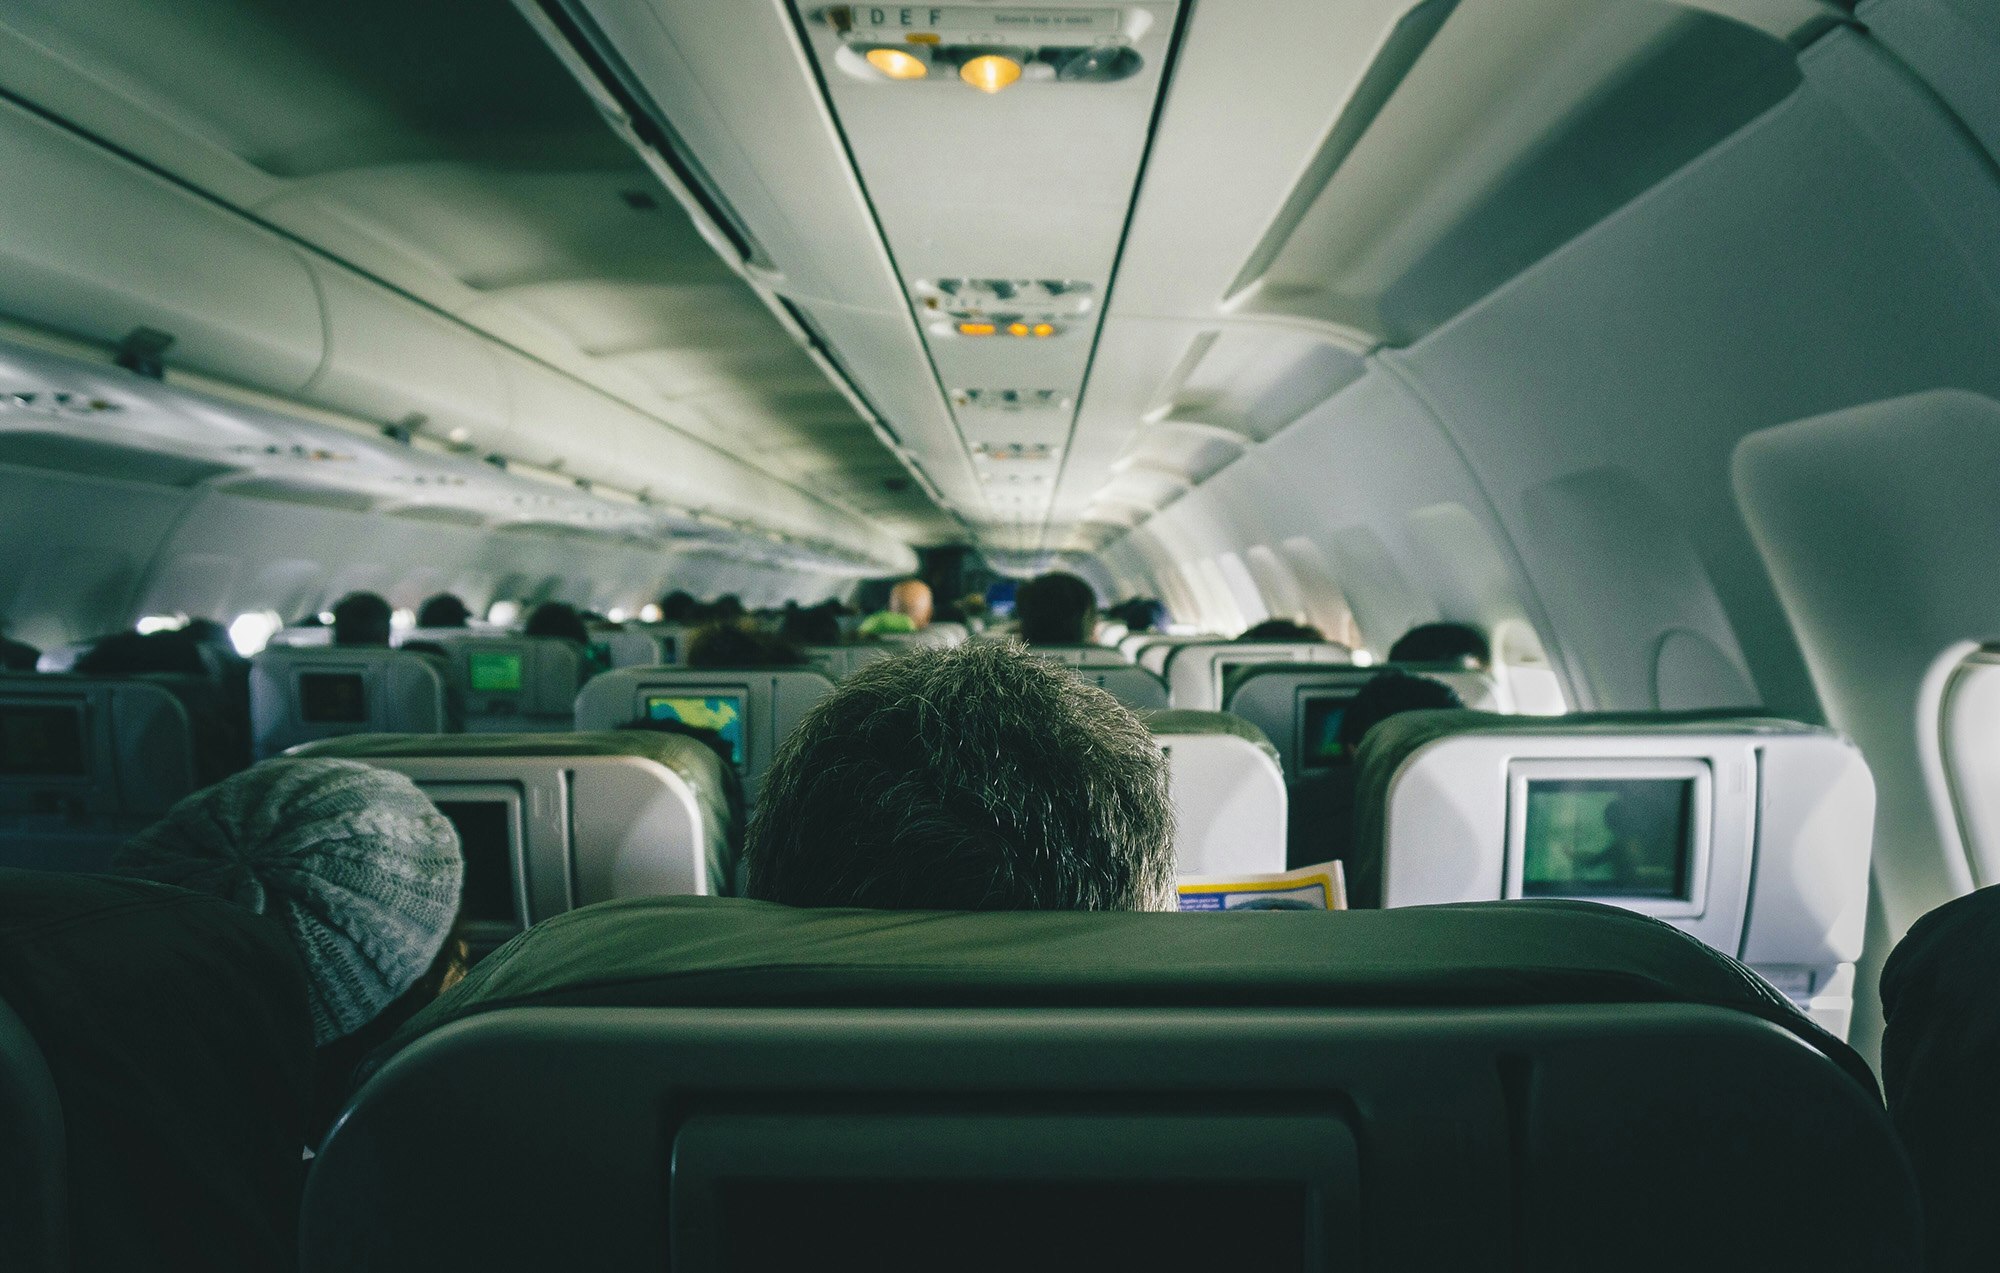 Rear view of people sitting on a plane